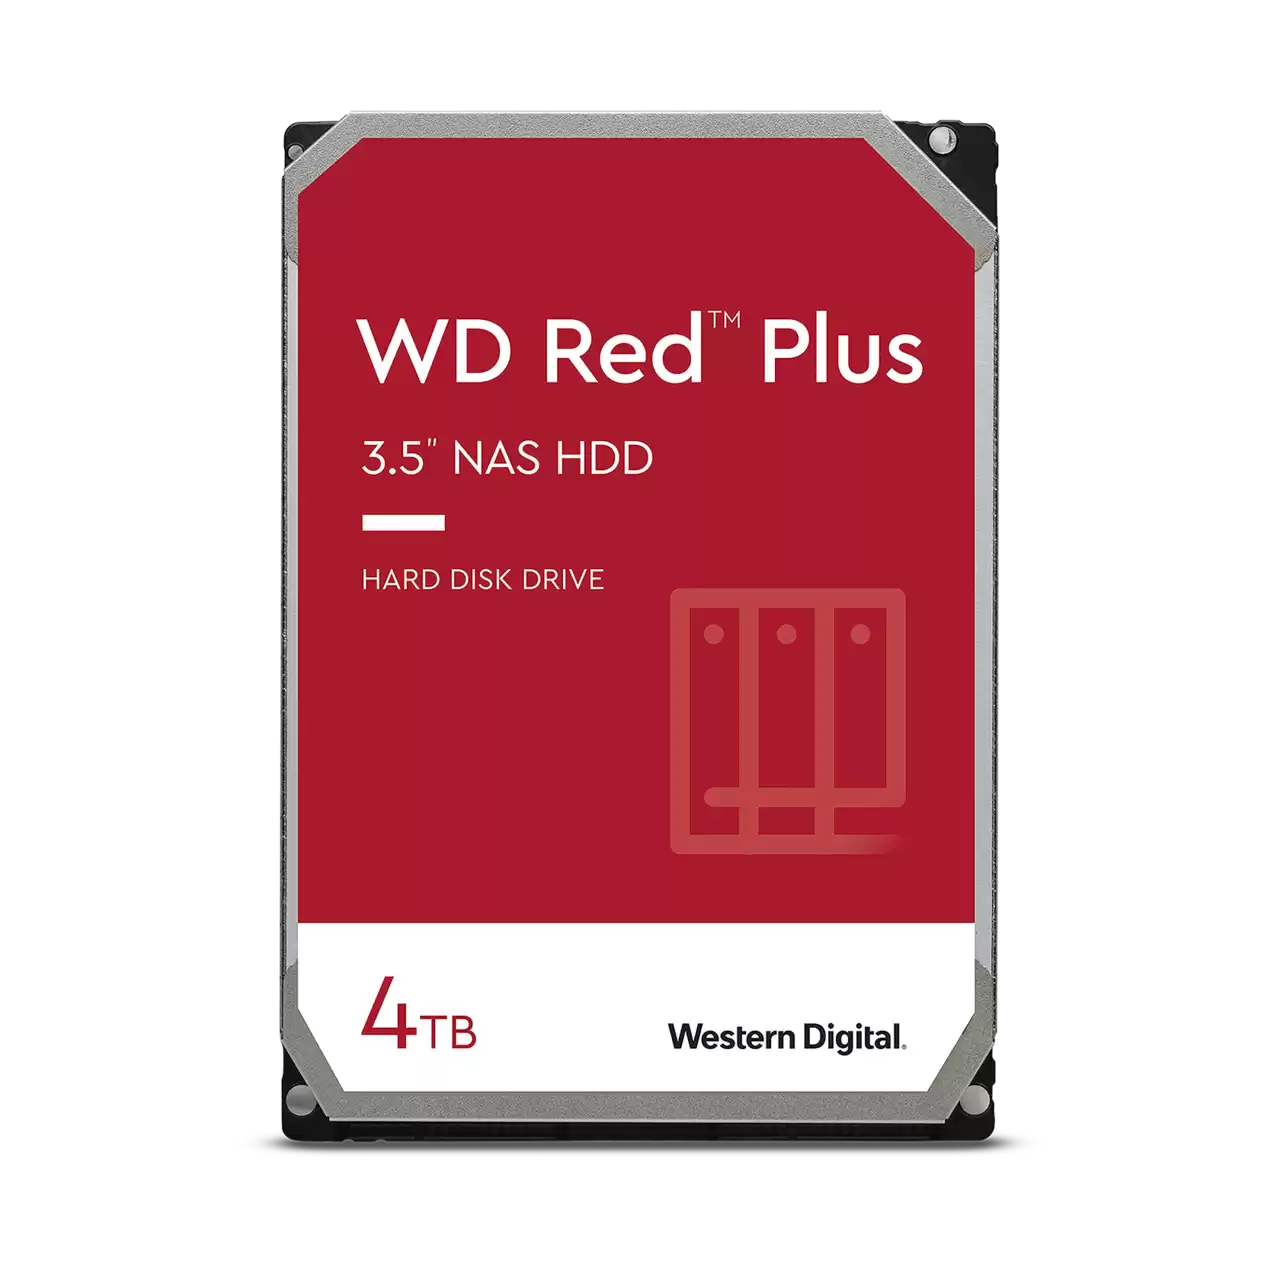 WD Red Plus 4TB 5400rpm 256MB 3.5" NAS HDD (WD40EFPX)